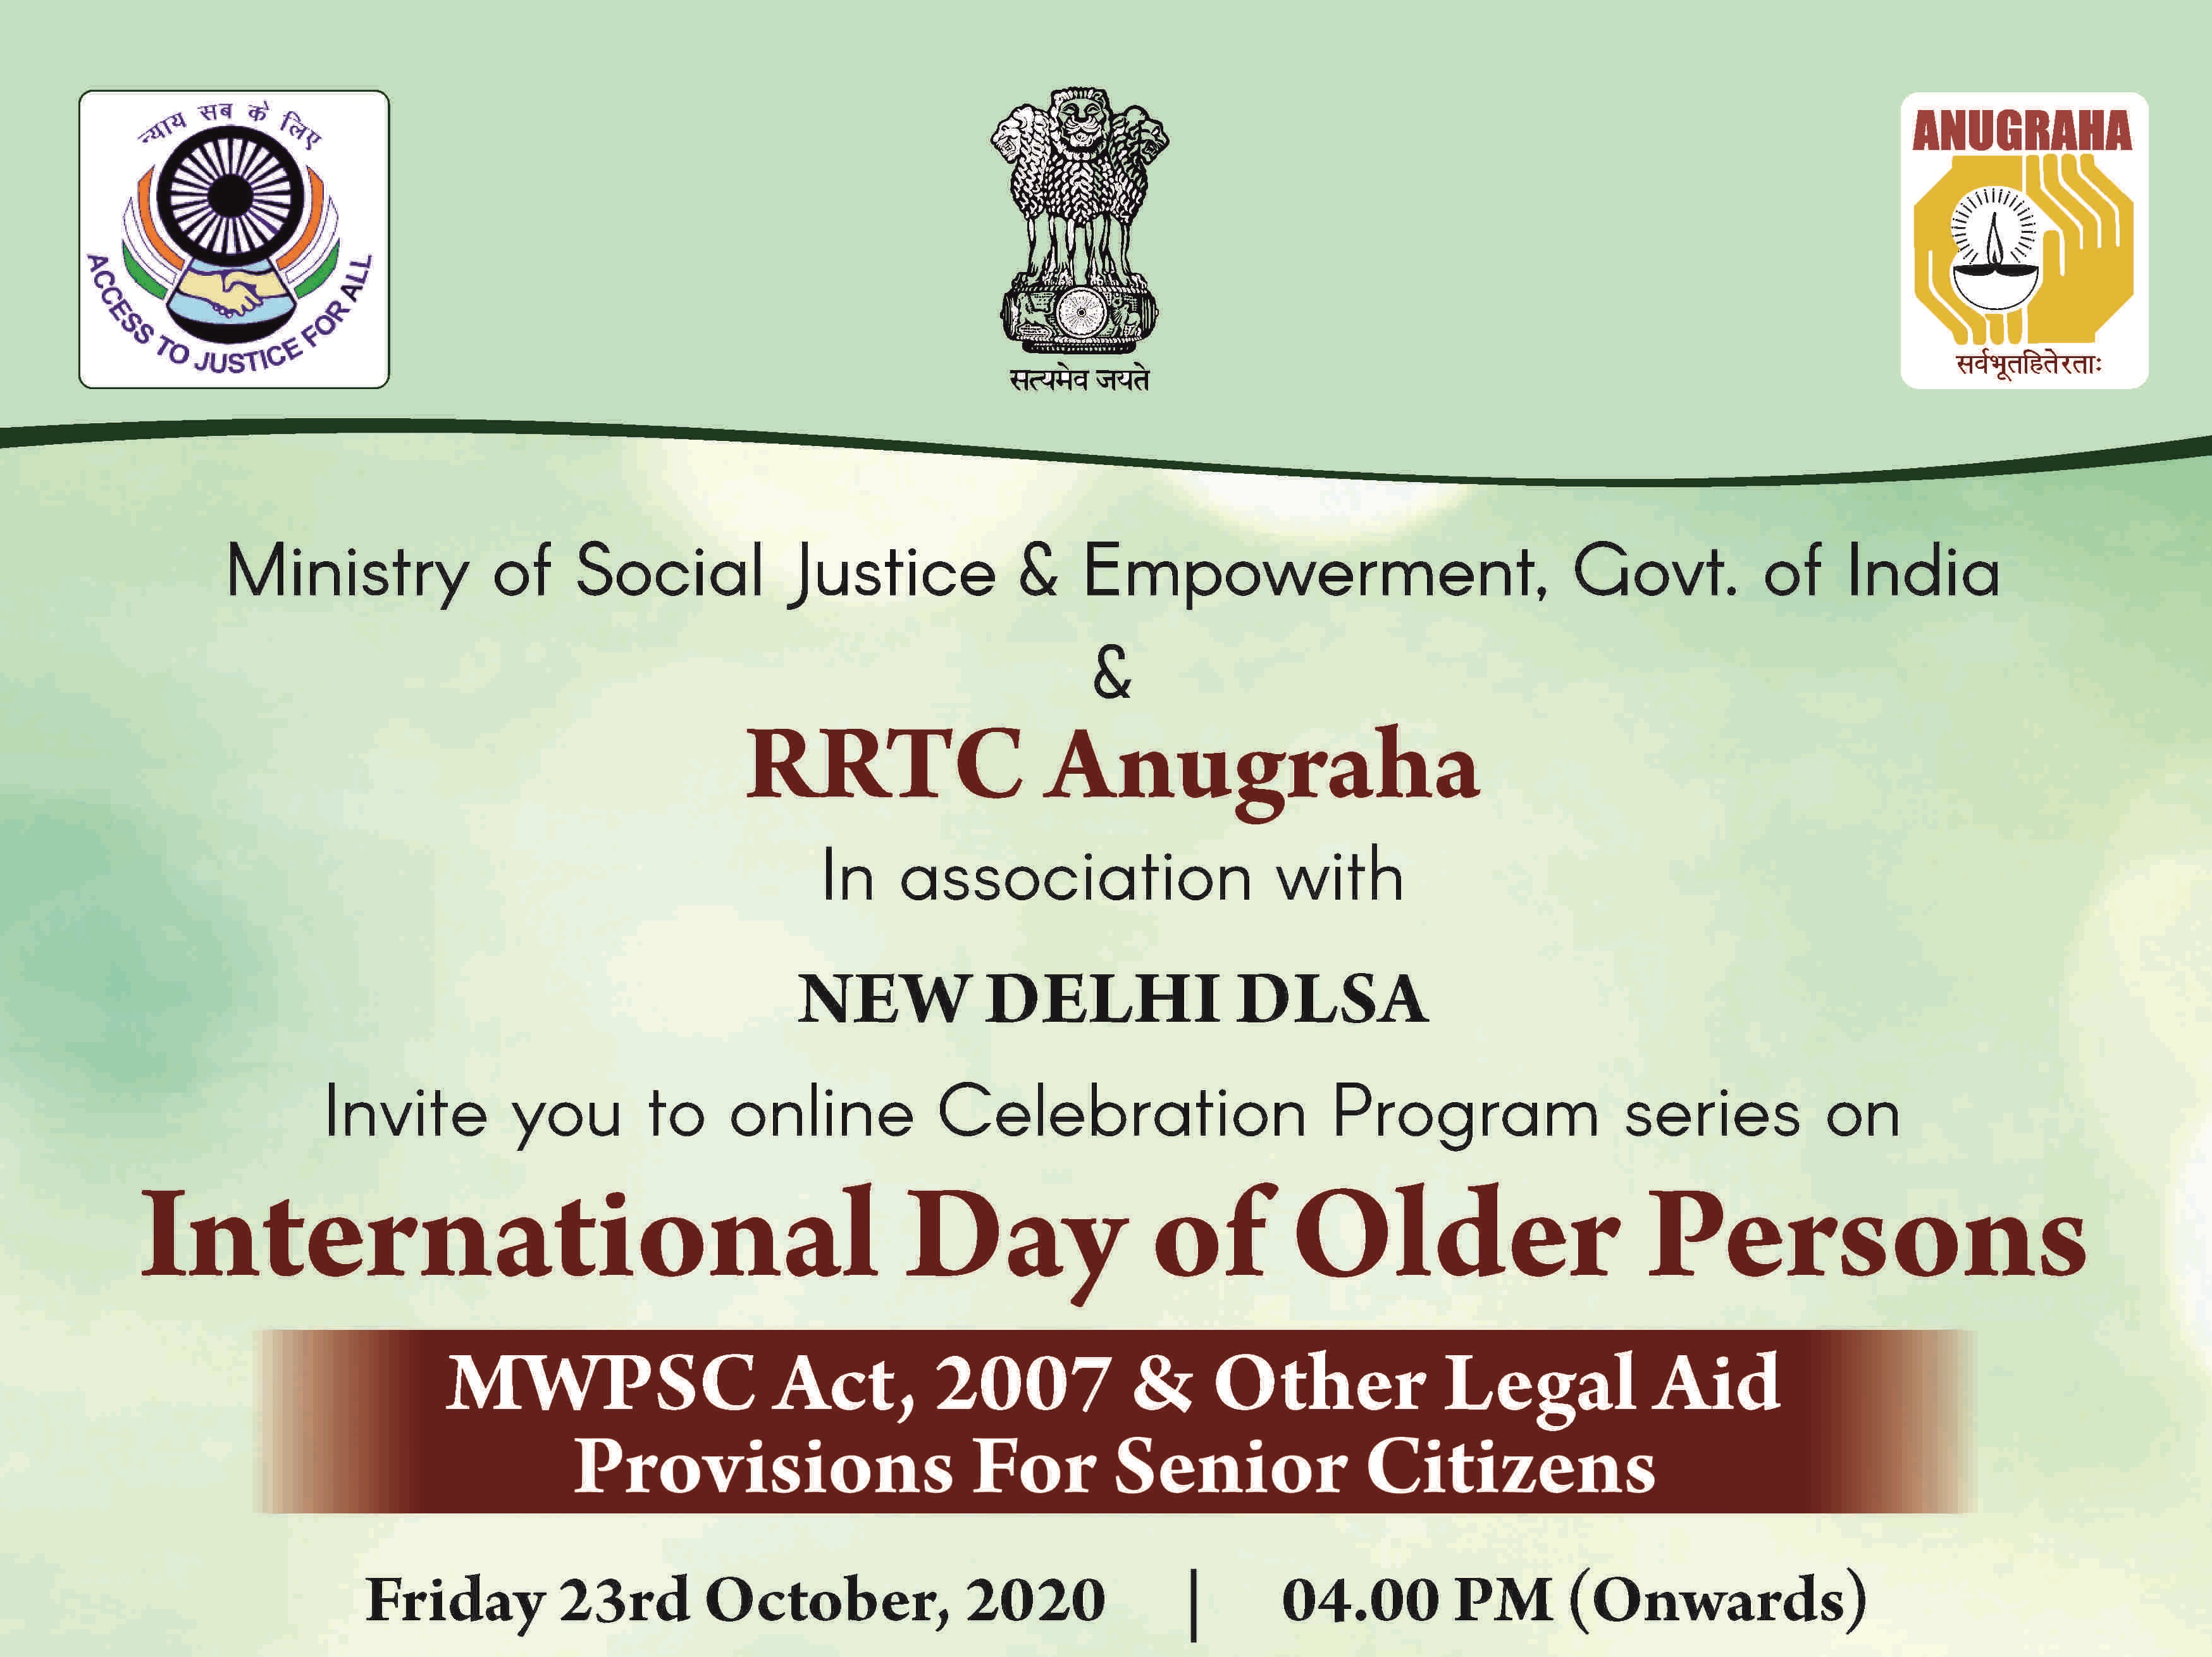 MSJE & Anugraha Event: MWPSC Act & Legal Aid Provisions For Senior Citizens [23rd Oct]